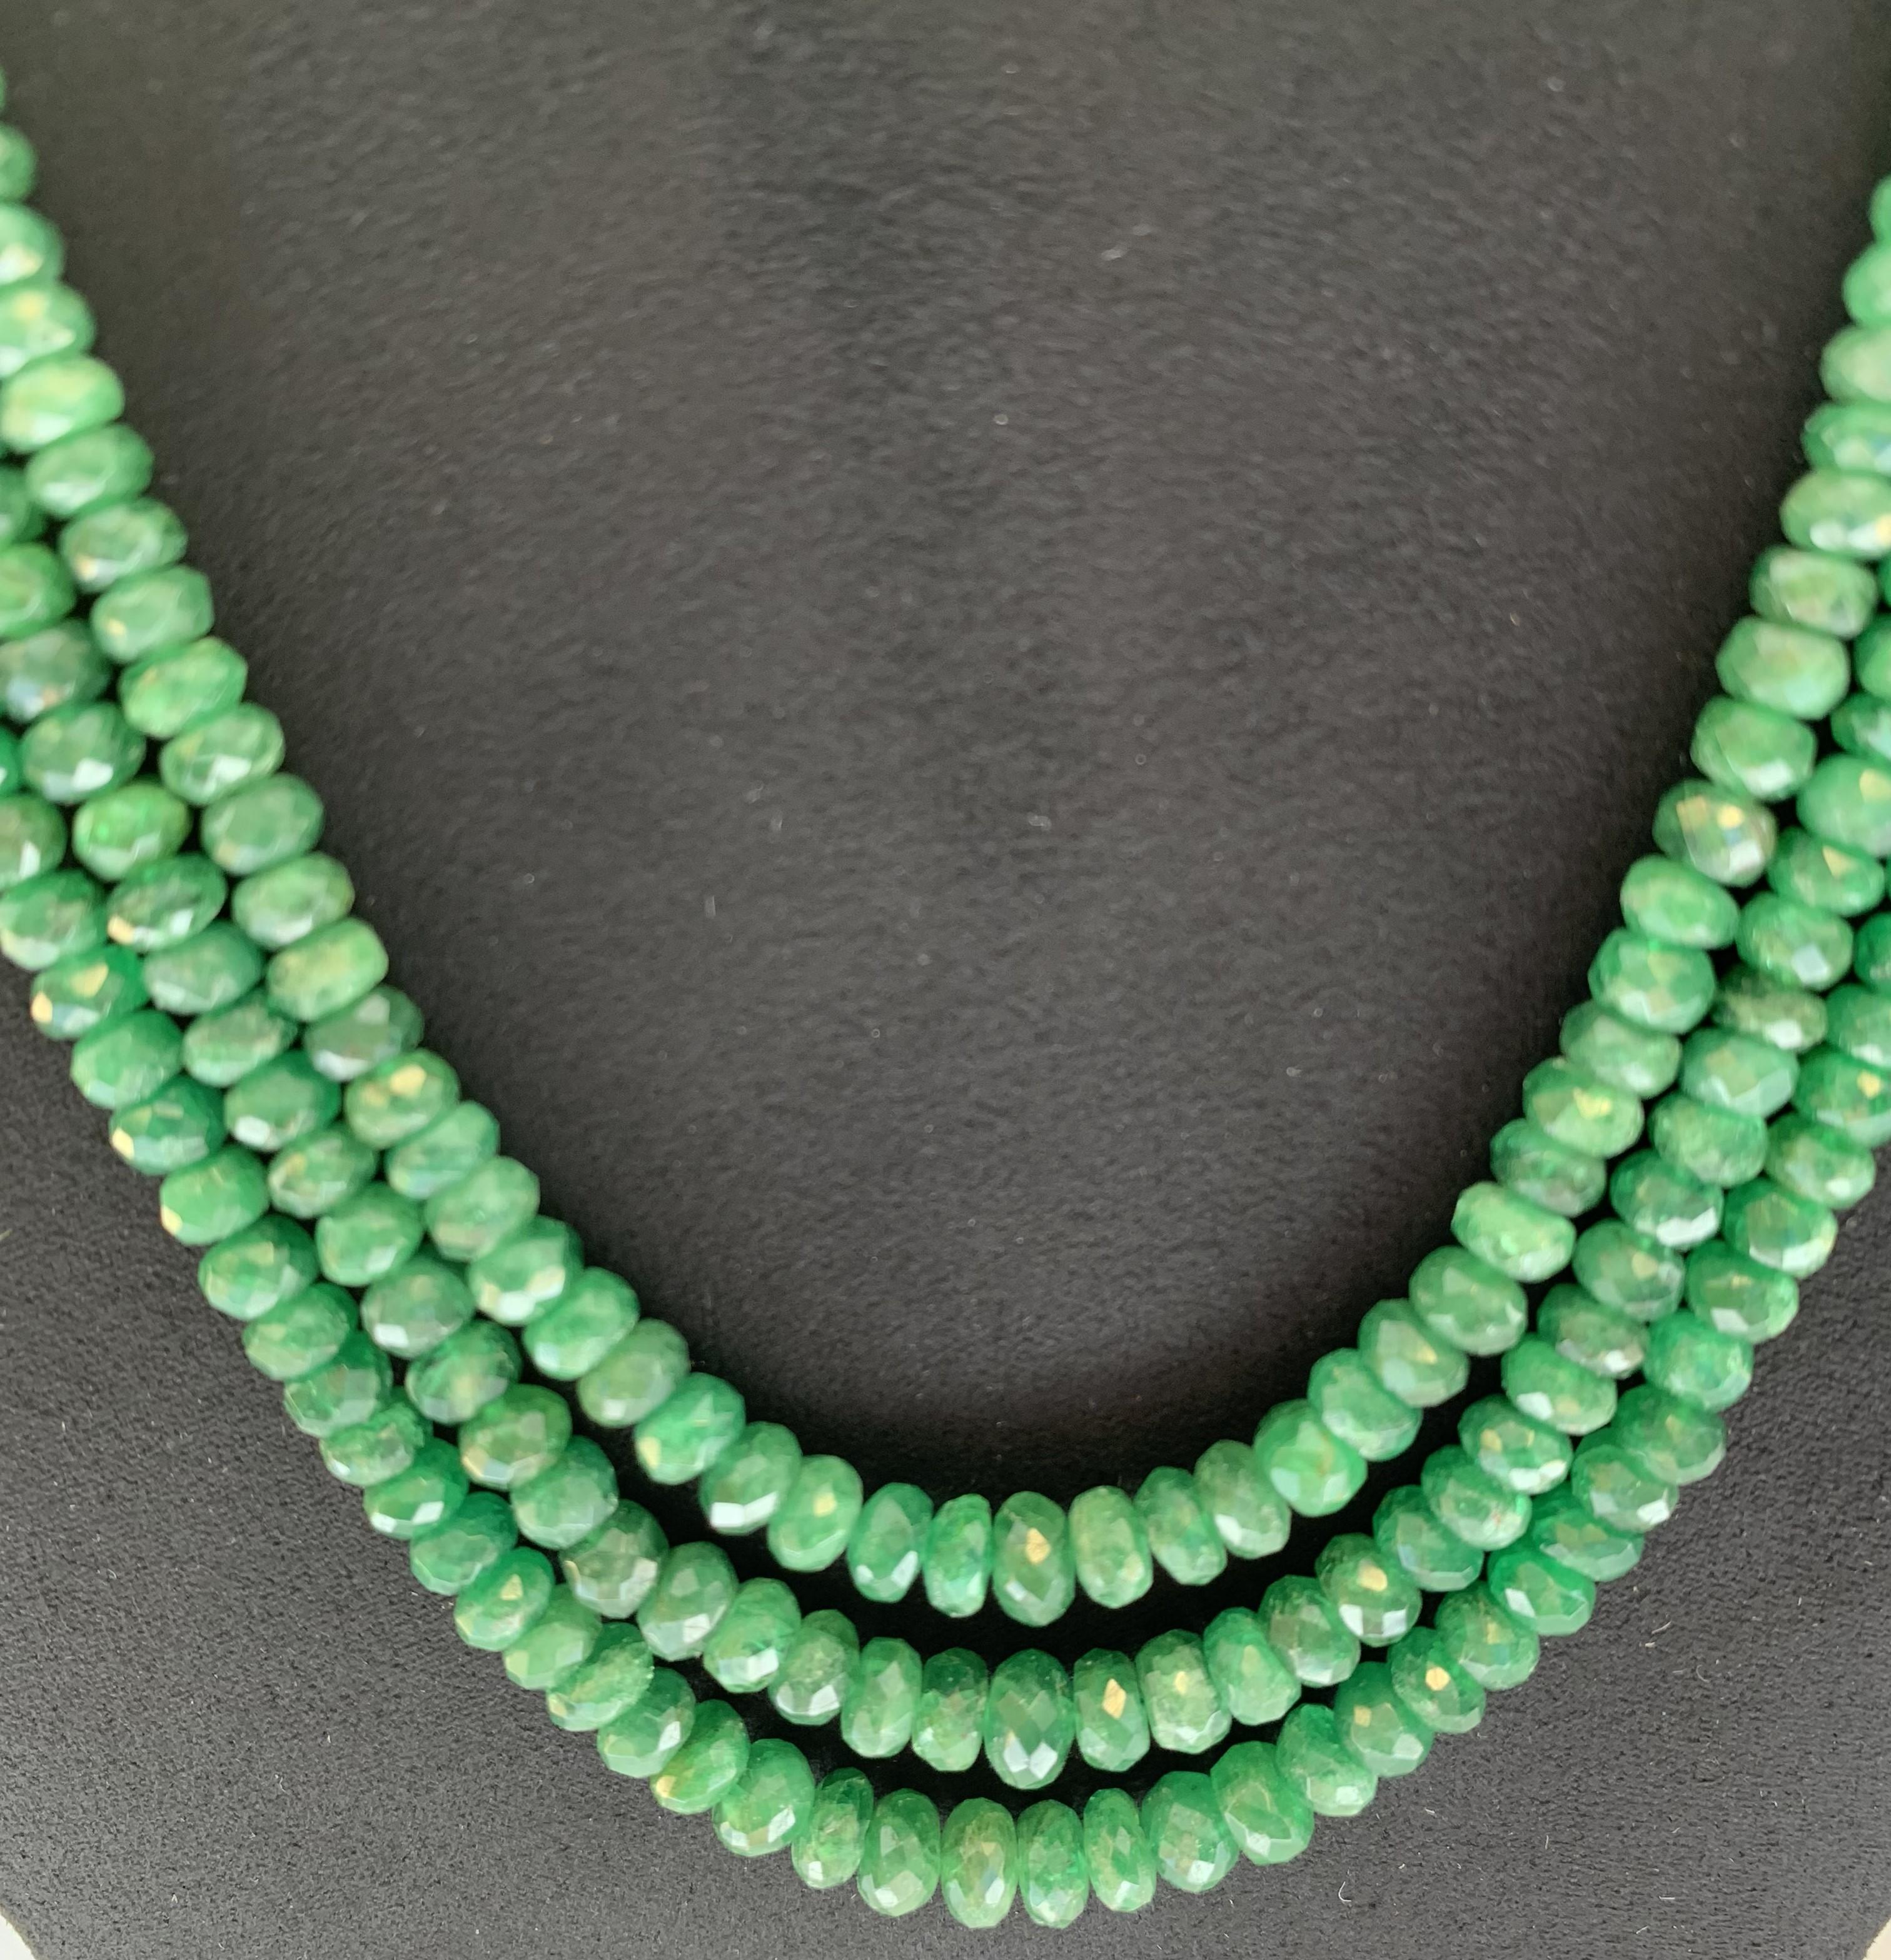 Life in color Collection

Bright Green Tsavorite beaded totaling 272.12ct featuring as a triple lines string long necklace. The length can be adjustable from the basic 22 inches.

Tsavorite: 272.12ct total weight.
